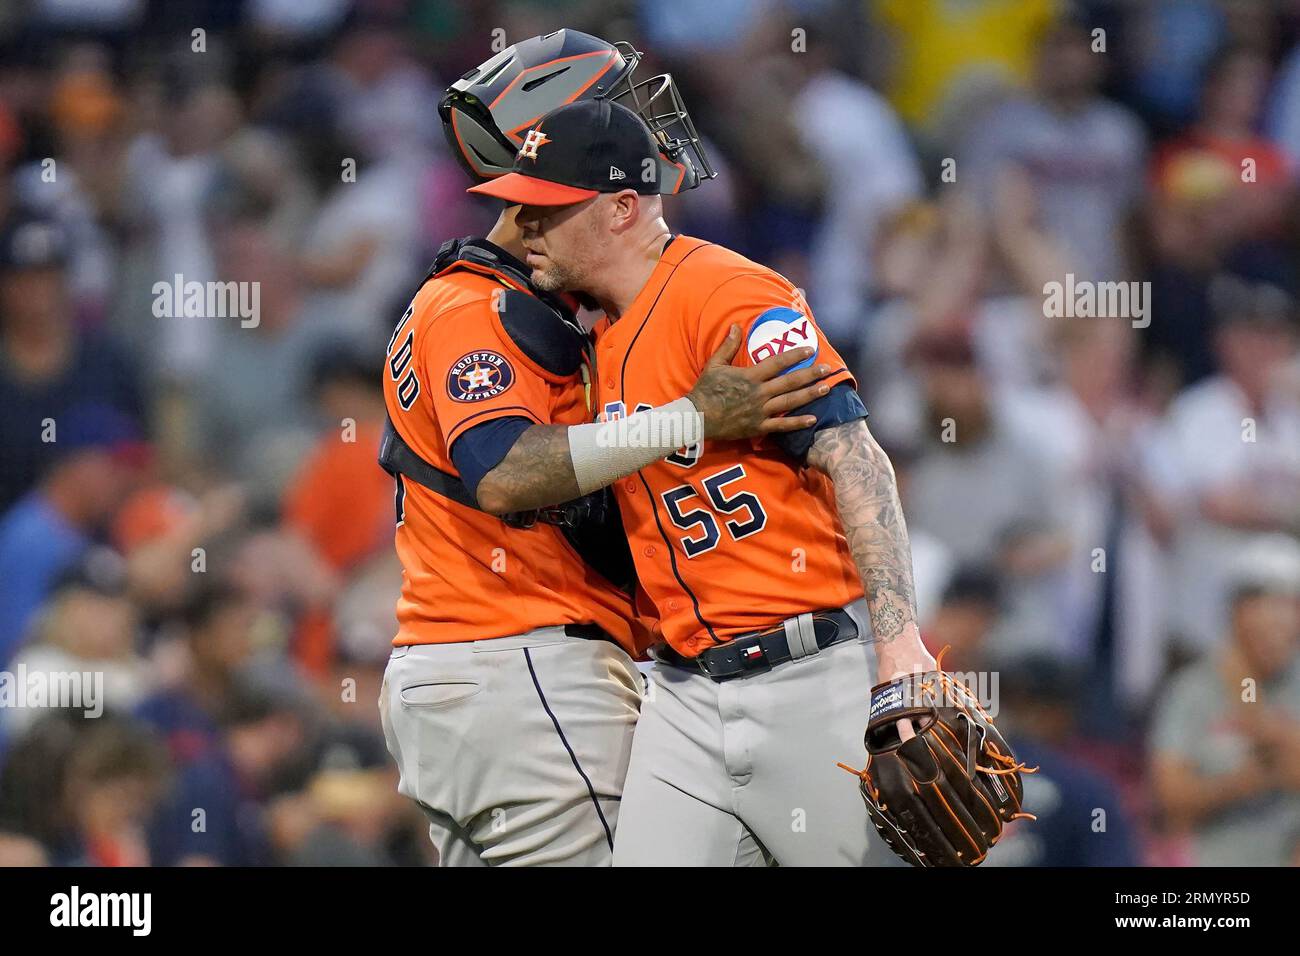 August 10, 2018: Houston Astros relief pitcher Ryan Pressly (55) pitches  during a Major League Baseball game between the Houston Astros and the  Seattle Mariners on 1970s night at Minute Maid Park